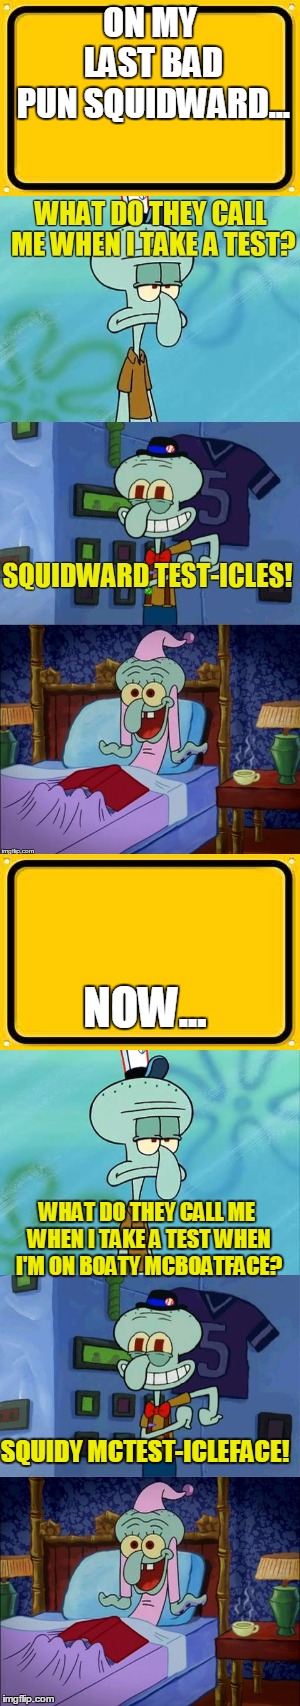 Bad Pun Squidward (Template by Juicydeath1025) | ON MY LAST BAD PUN SQUIDWARD... NOW... WHAT DO THEY CALL ME WHEN I TAKE A TEST WHEN I'M ON BOATY MCBOATFACE? SQUIDY MCTEST-ICLEFACE! | image tagged in memes,blank yellow sign,bad pun squidward,squidward,testicles,bad pun | made w/ Imgflip meme maker